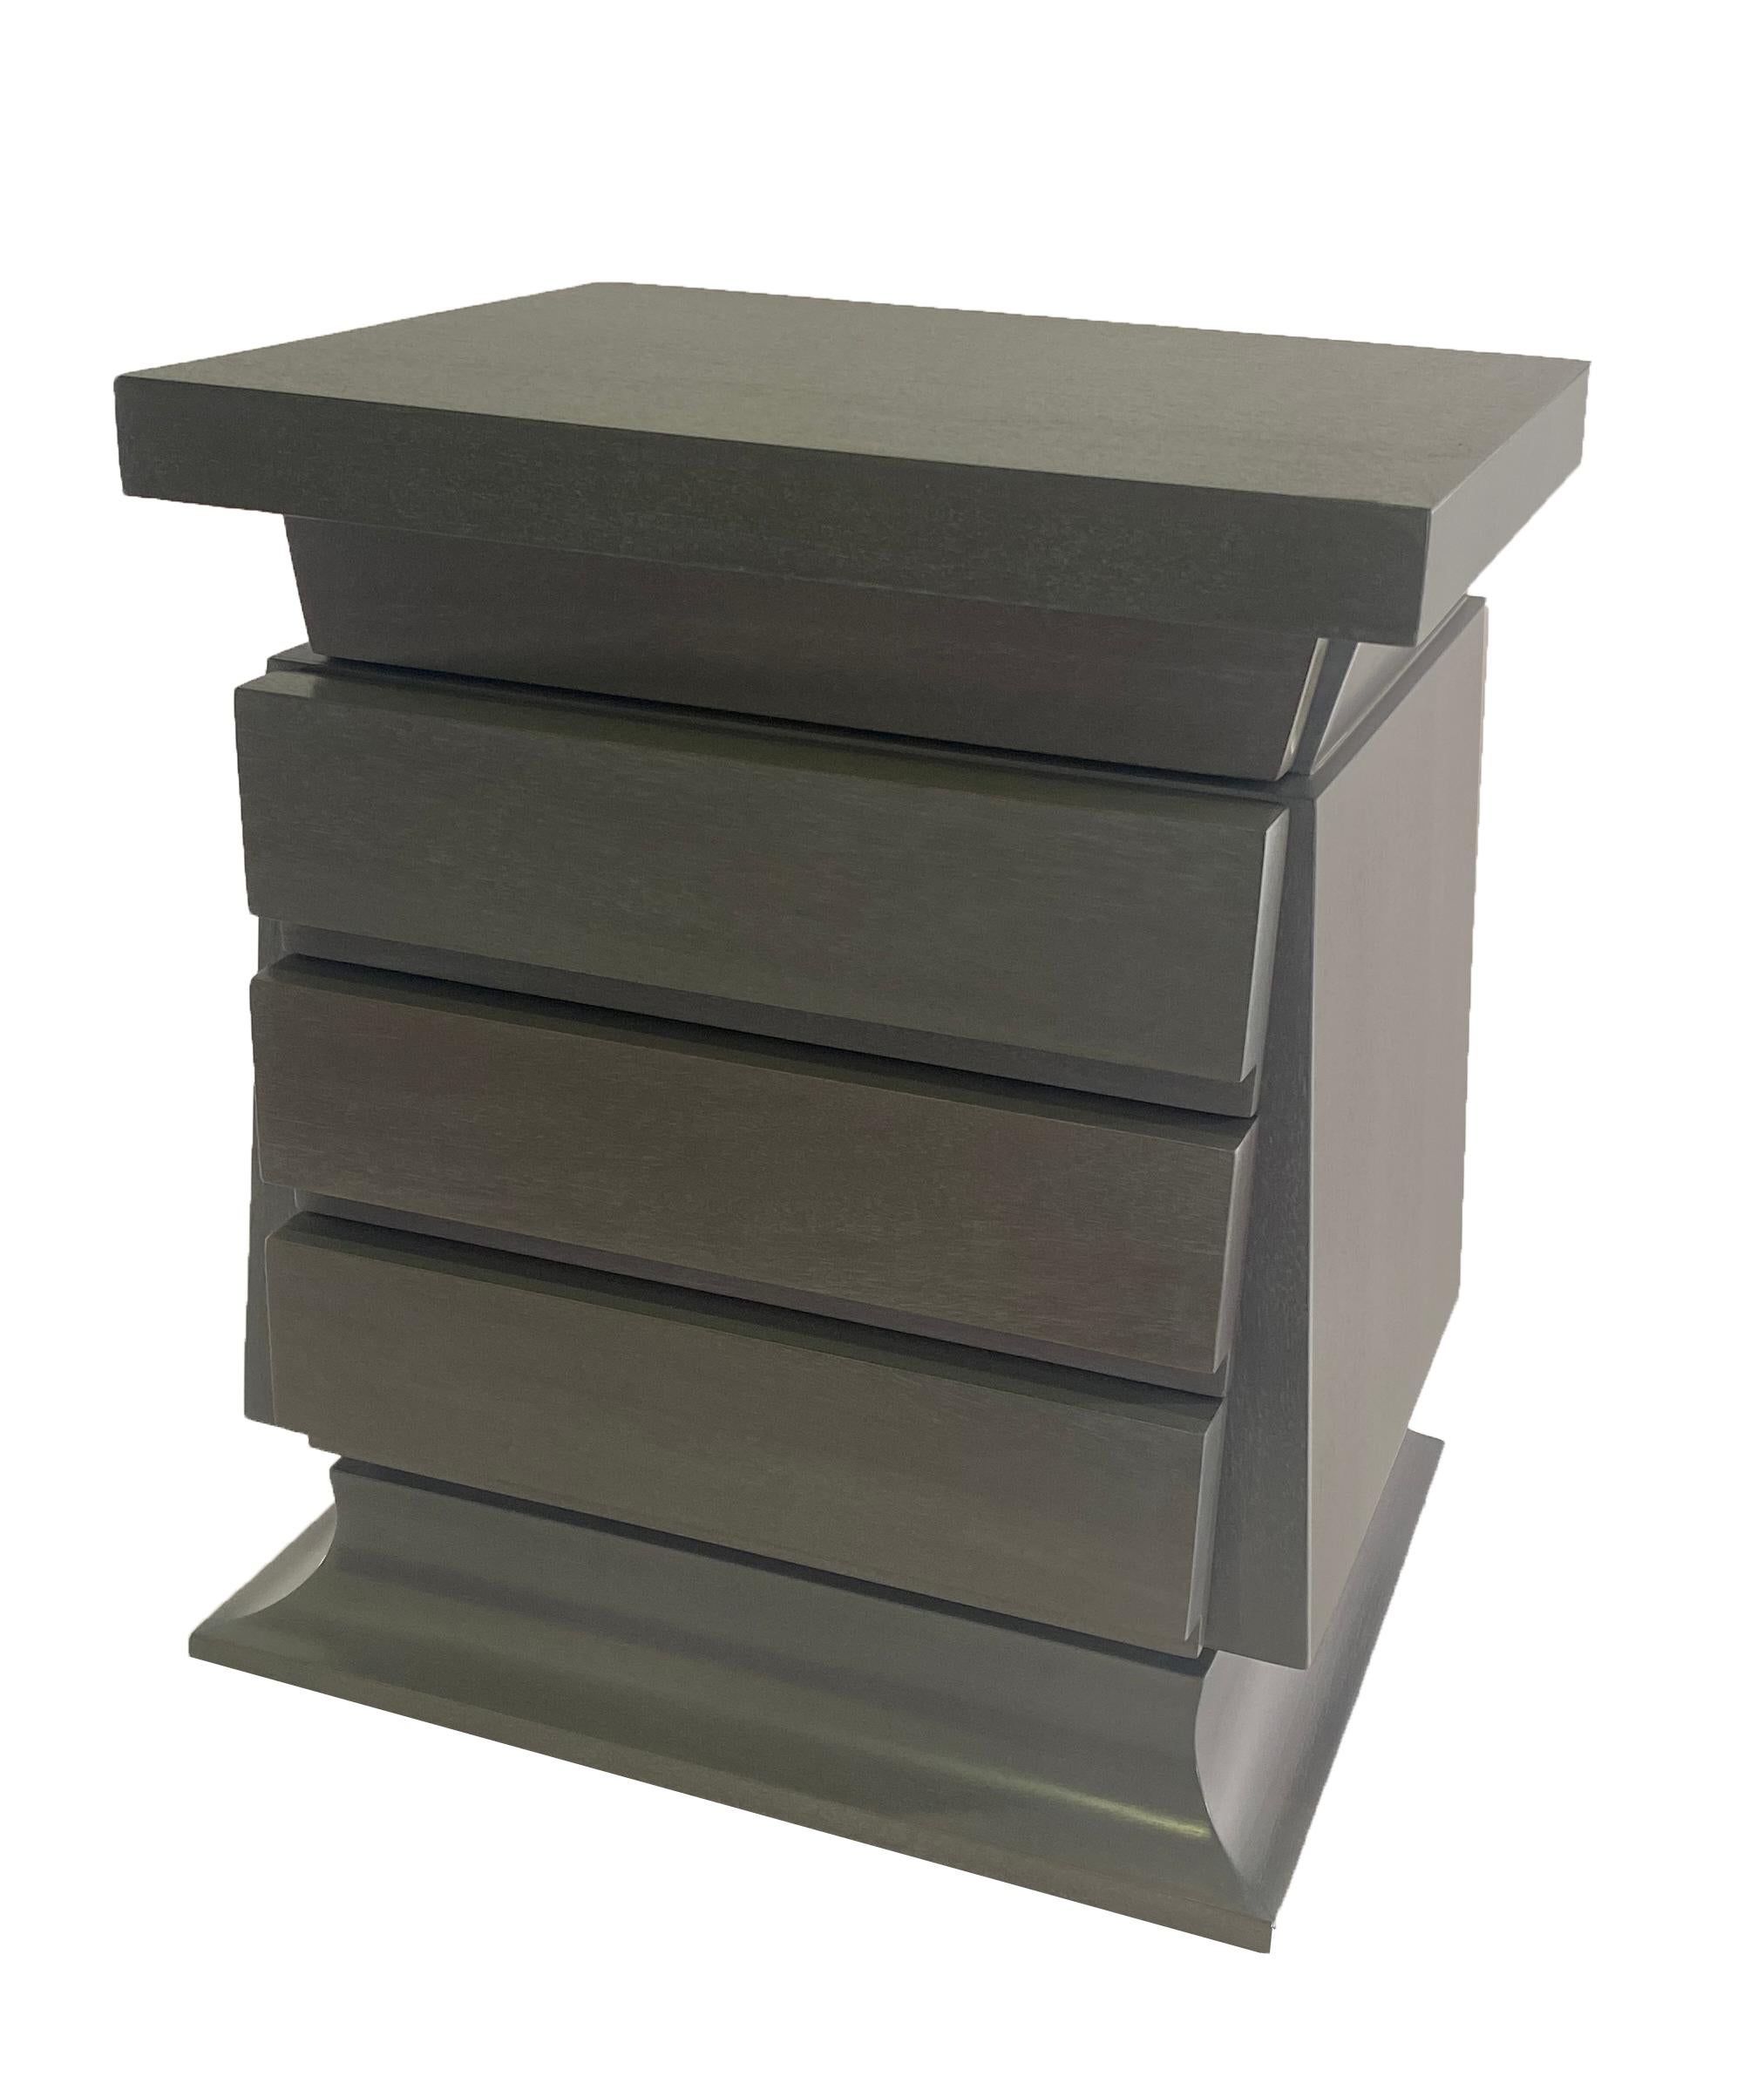 Pair of American Modern Cerused Grey Nightstands, Harold Schwartz for Romweber In Good Condition For Sale In Hollywood, FL